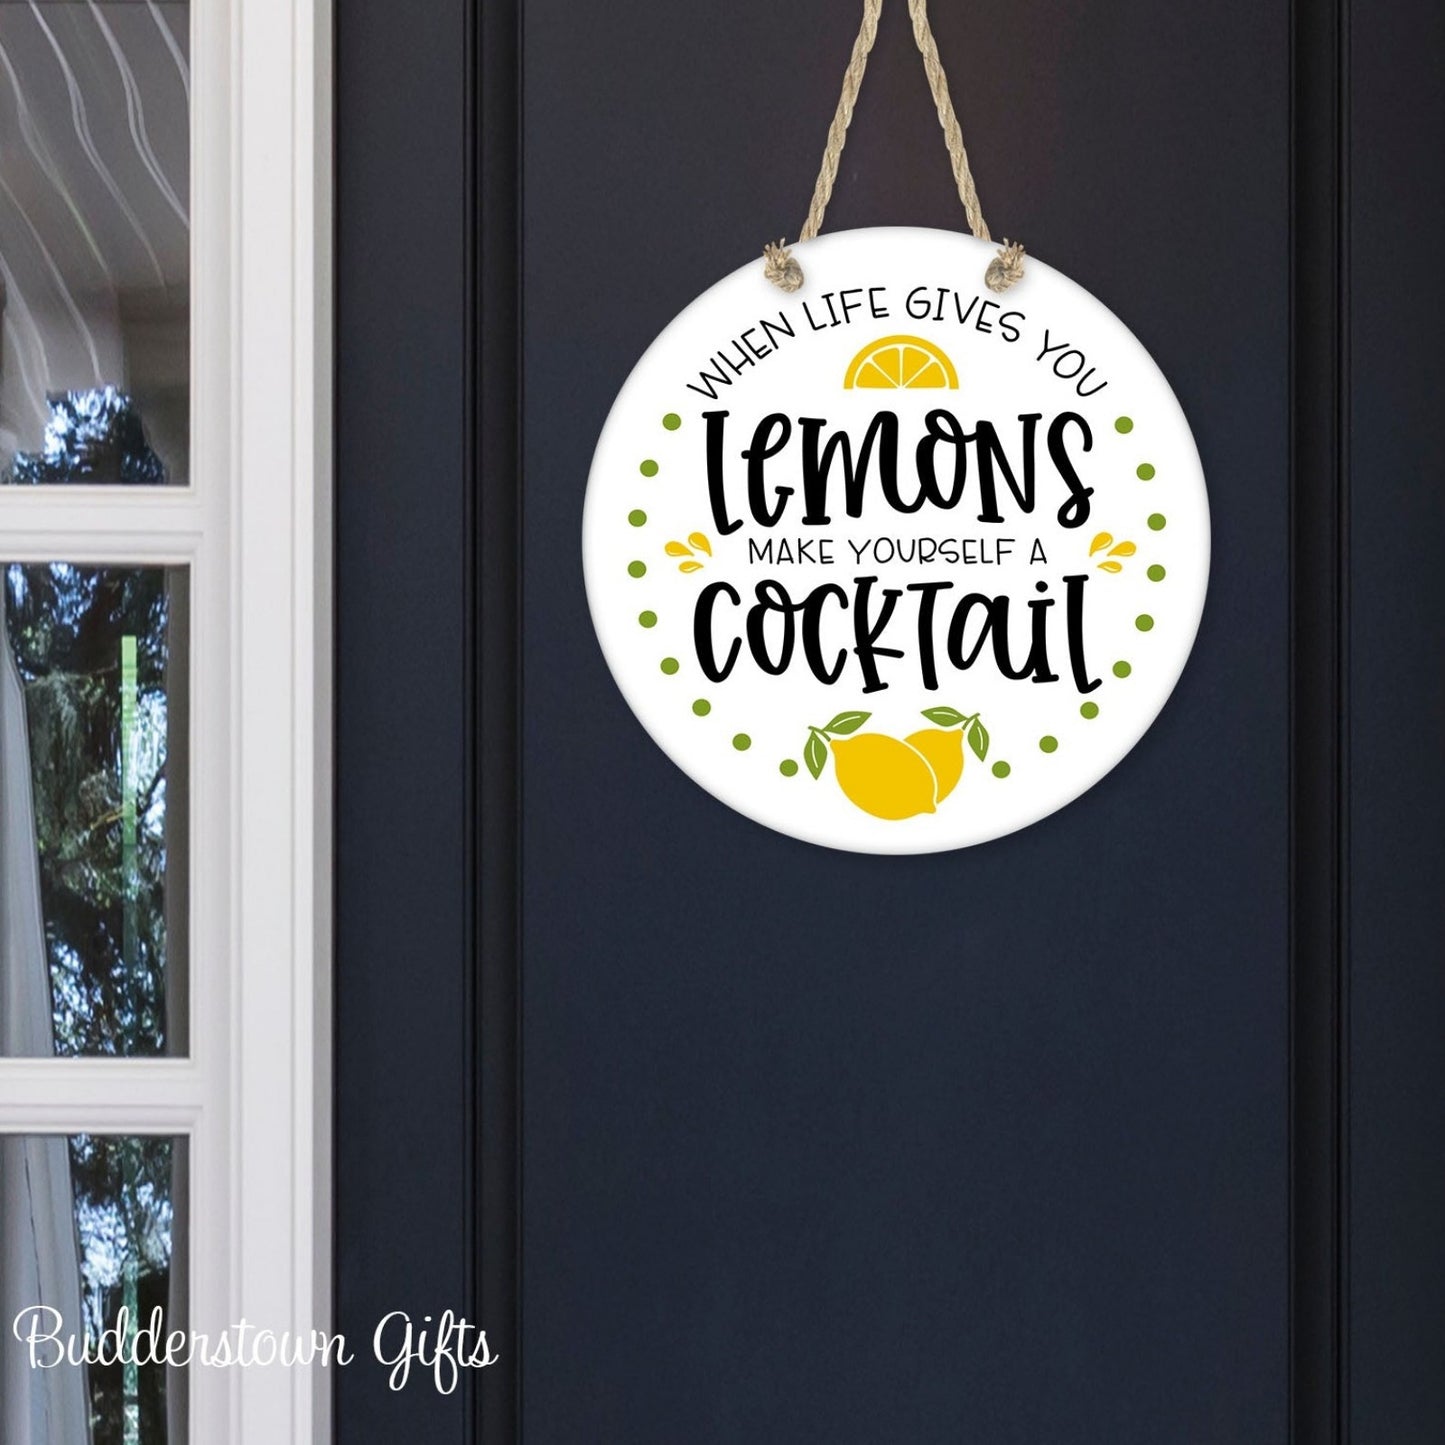 When life gives you Lemons make yourself a Cocktail - door sign